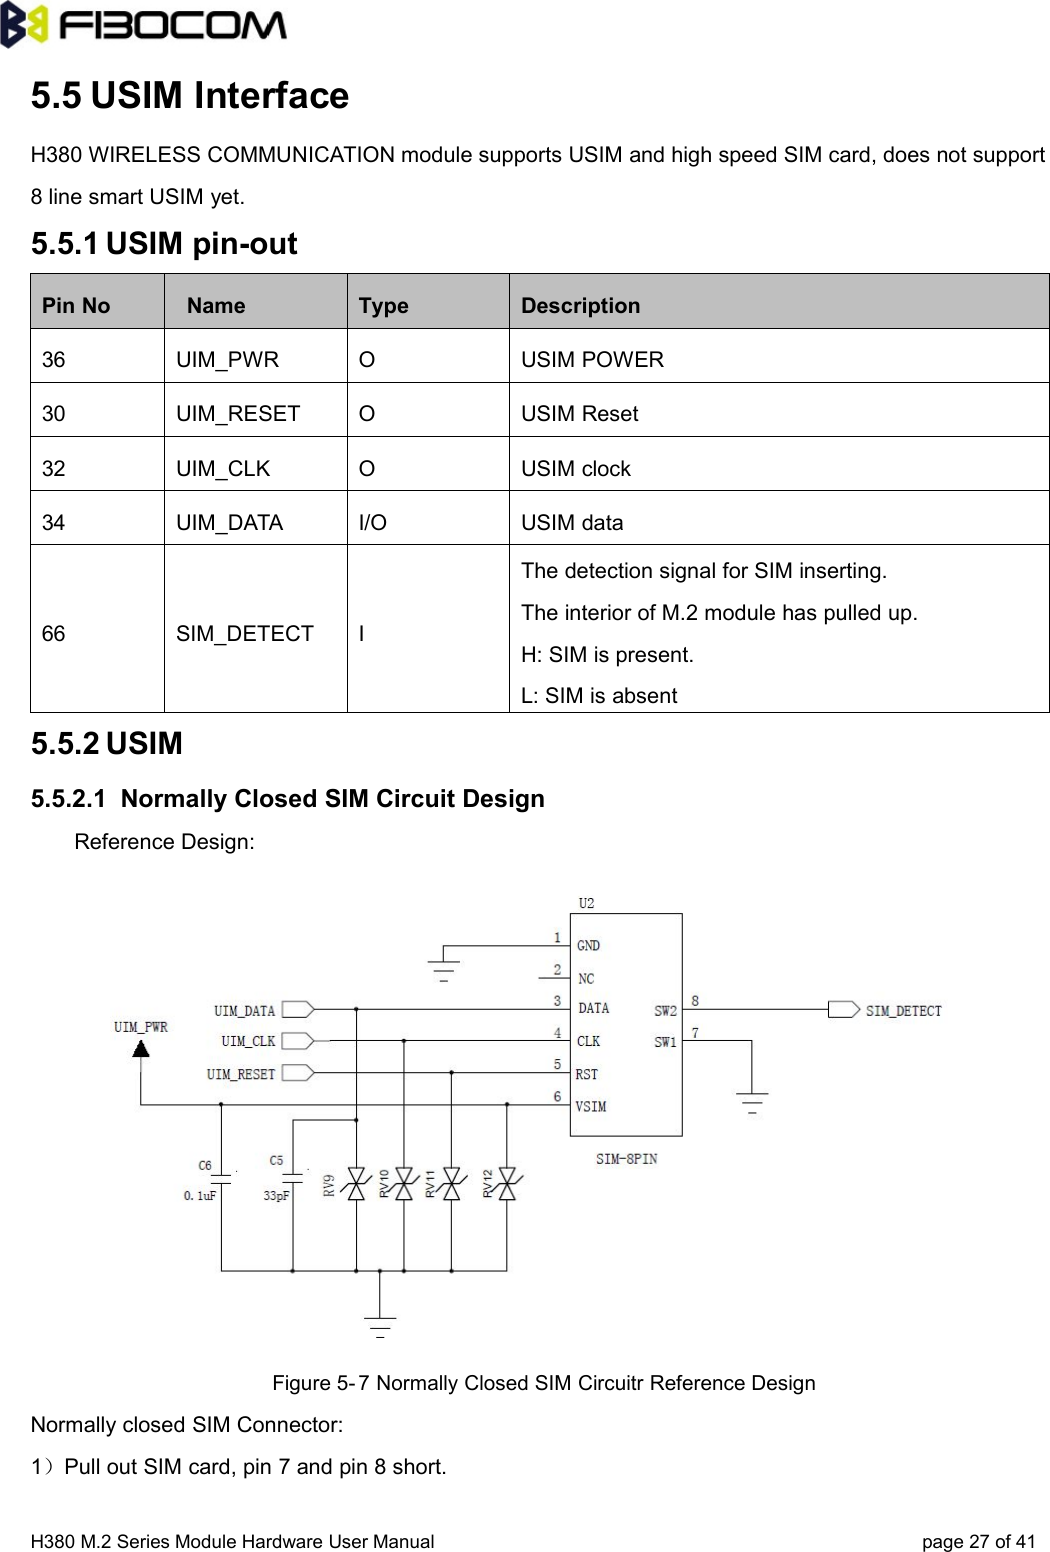 H380 M.2 Series Module Hardware User Manual page 27 of 415.5 USIM InterfaceH380 WIRELESS COMMUNICATION module supports USIM and high speed SIM card, does not support8 line smart USIM yet.5.5.1 USIM pin-outPin No Name Type Description36 UIM_PWR O USIM POWER30 UIM_RESET O USIM Reset32 UIM_CLK O USIM clock34 UIM_DATA I/O USIM data66 SIM_DETECT IThe detection signal for SIM inserting.The interior of M.2 module has pulled up.H: SIM is present.L: SIM is absent5.5.2 USIM5.5.2.1 Normally Closed SIM Circuit DesignReference Design:Figure 5- 7 Normally Closed SIM Circuitr Reference DesignNormally closed SIM Connector:1）Pull out SIM card, pin 7 and pin 8 short.